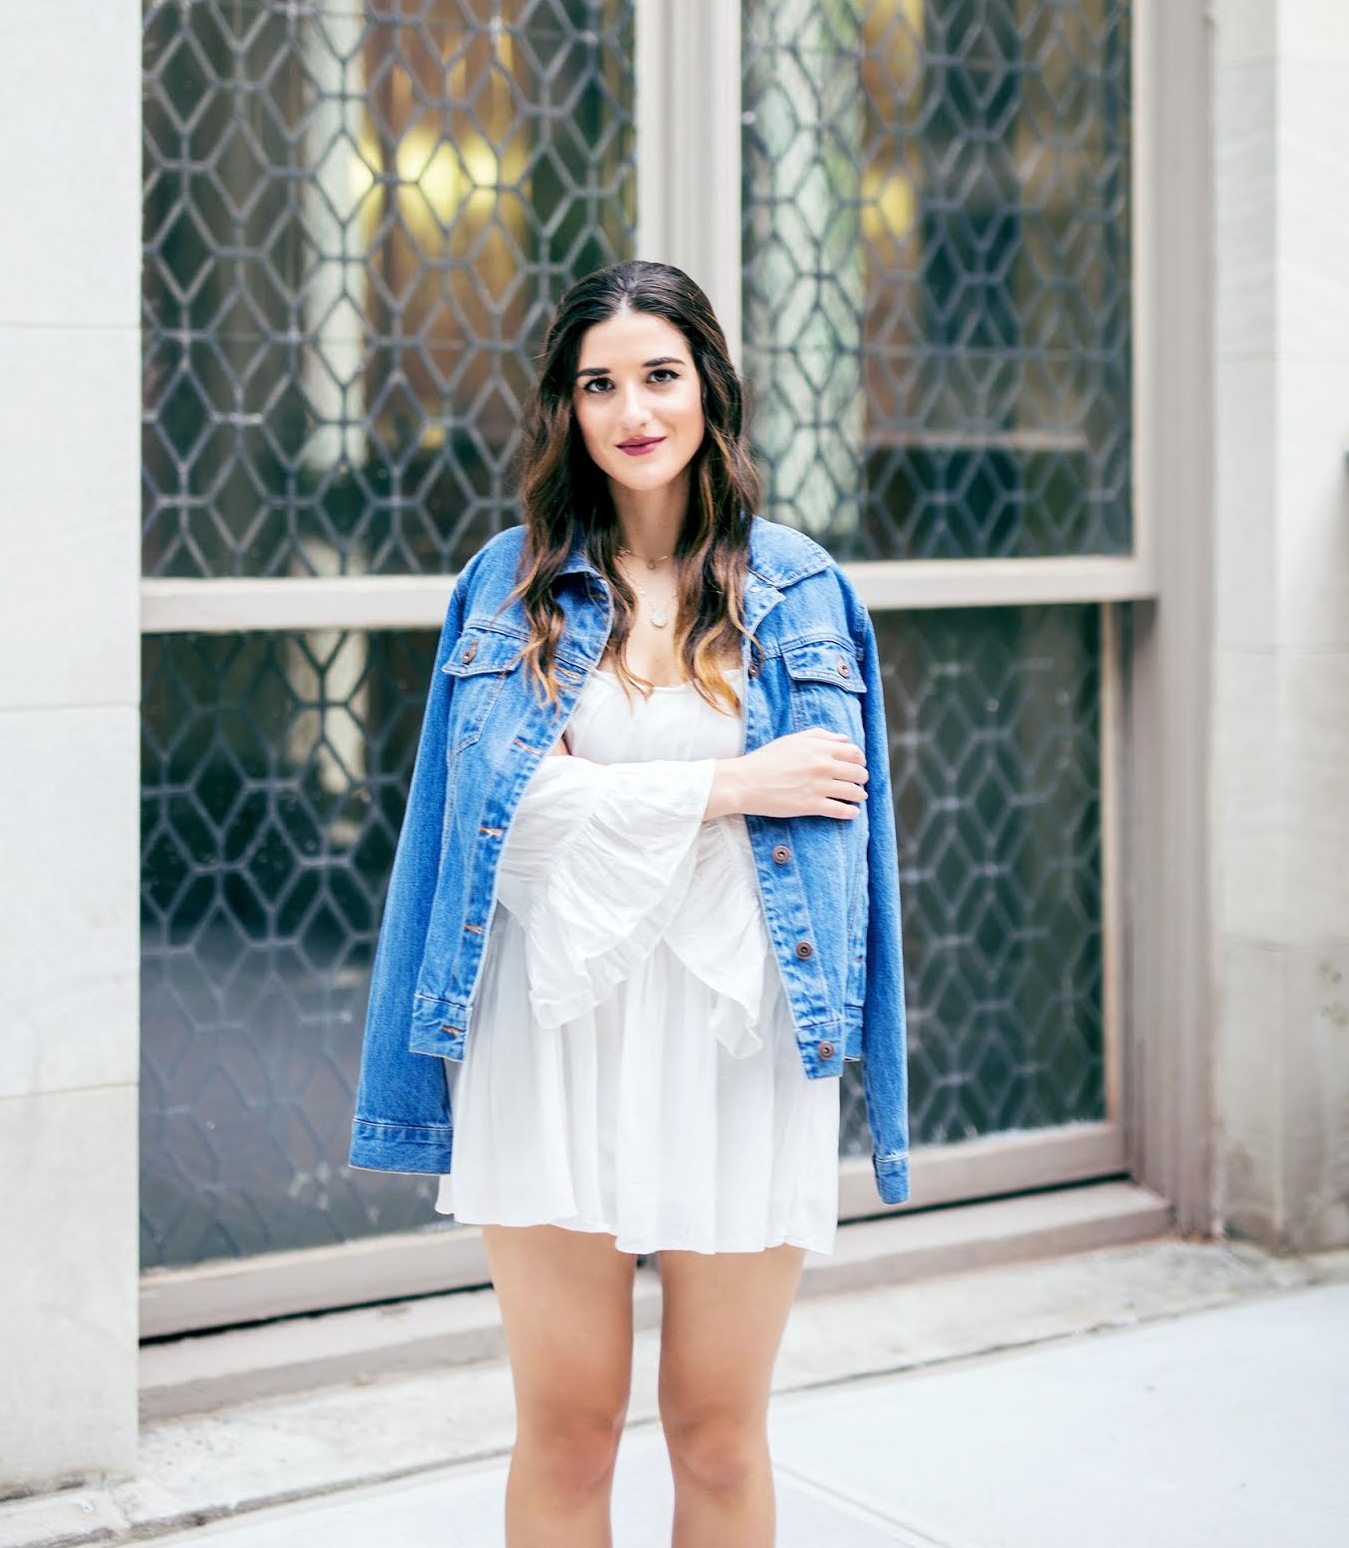 White Romper Jack Rogers Sandals Louboutins & Love Fashion Blog Esther Santer NYC Street Style Blogger Outfit OOTD Trendy Summer Spring Shopping Girls Women Hair Jean Jacket Denim Chokers Leather Shoes Long Sleeves Quality Cute Beautiful Pretty Look.jpg